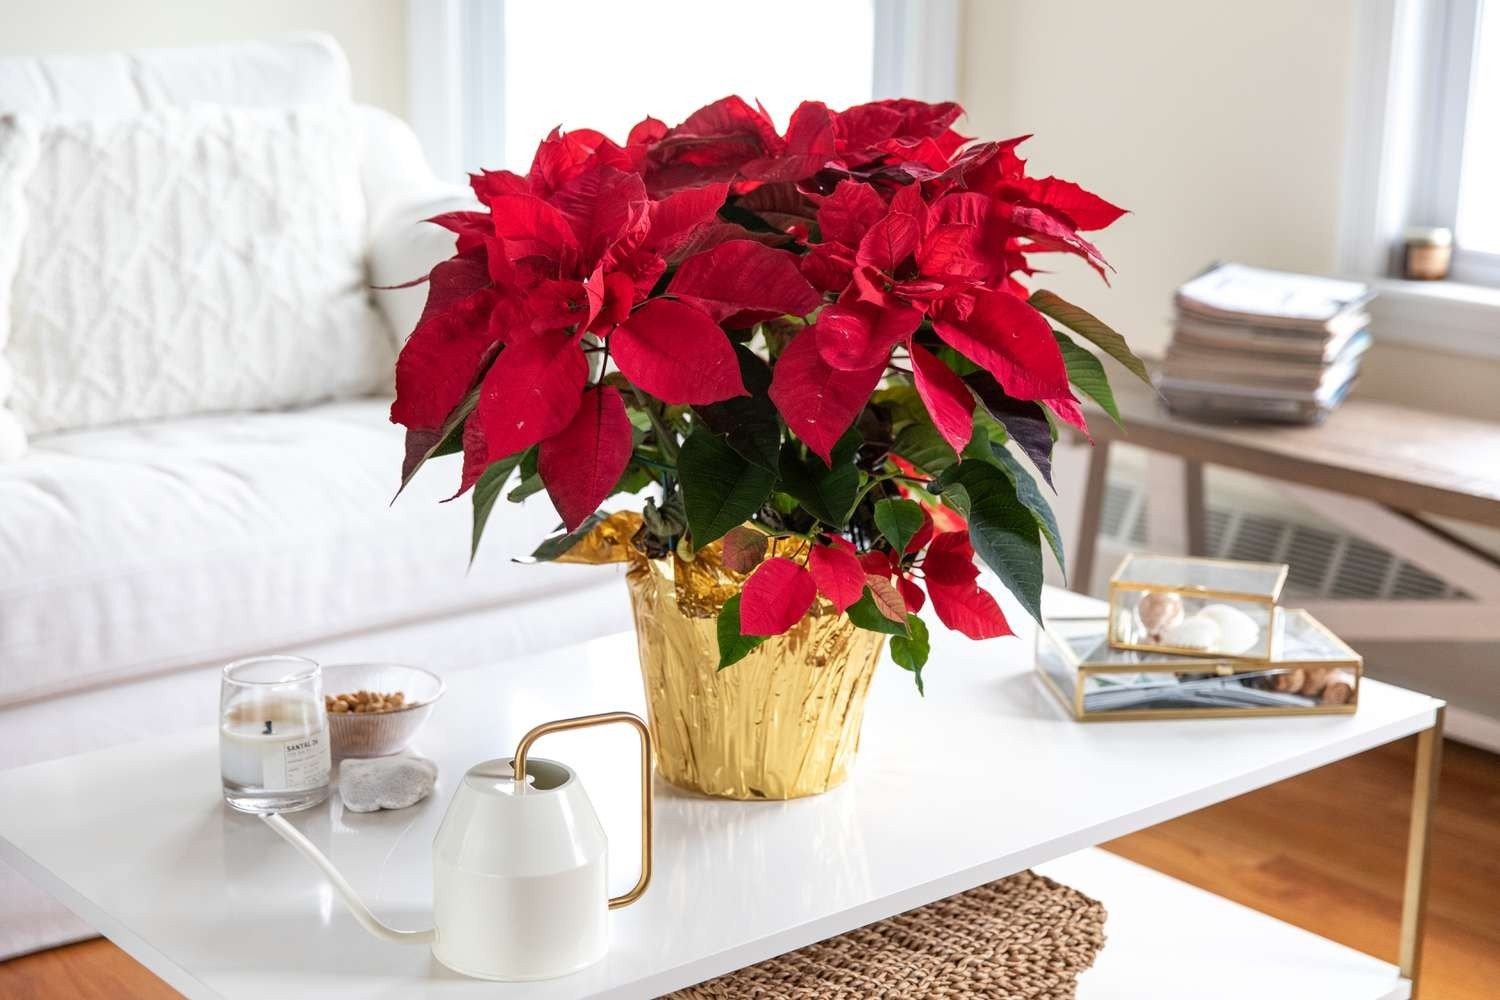 poinsettias-keepers-or-compost-1403587-01-0d51ae63bedf43d686c59e15f90016ee.jpg